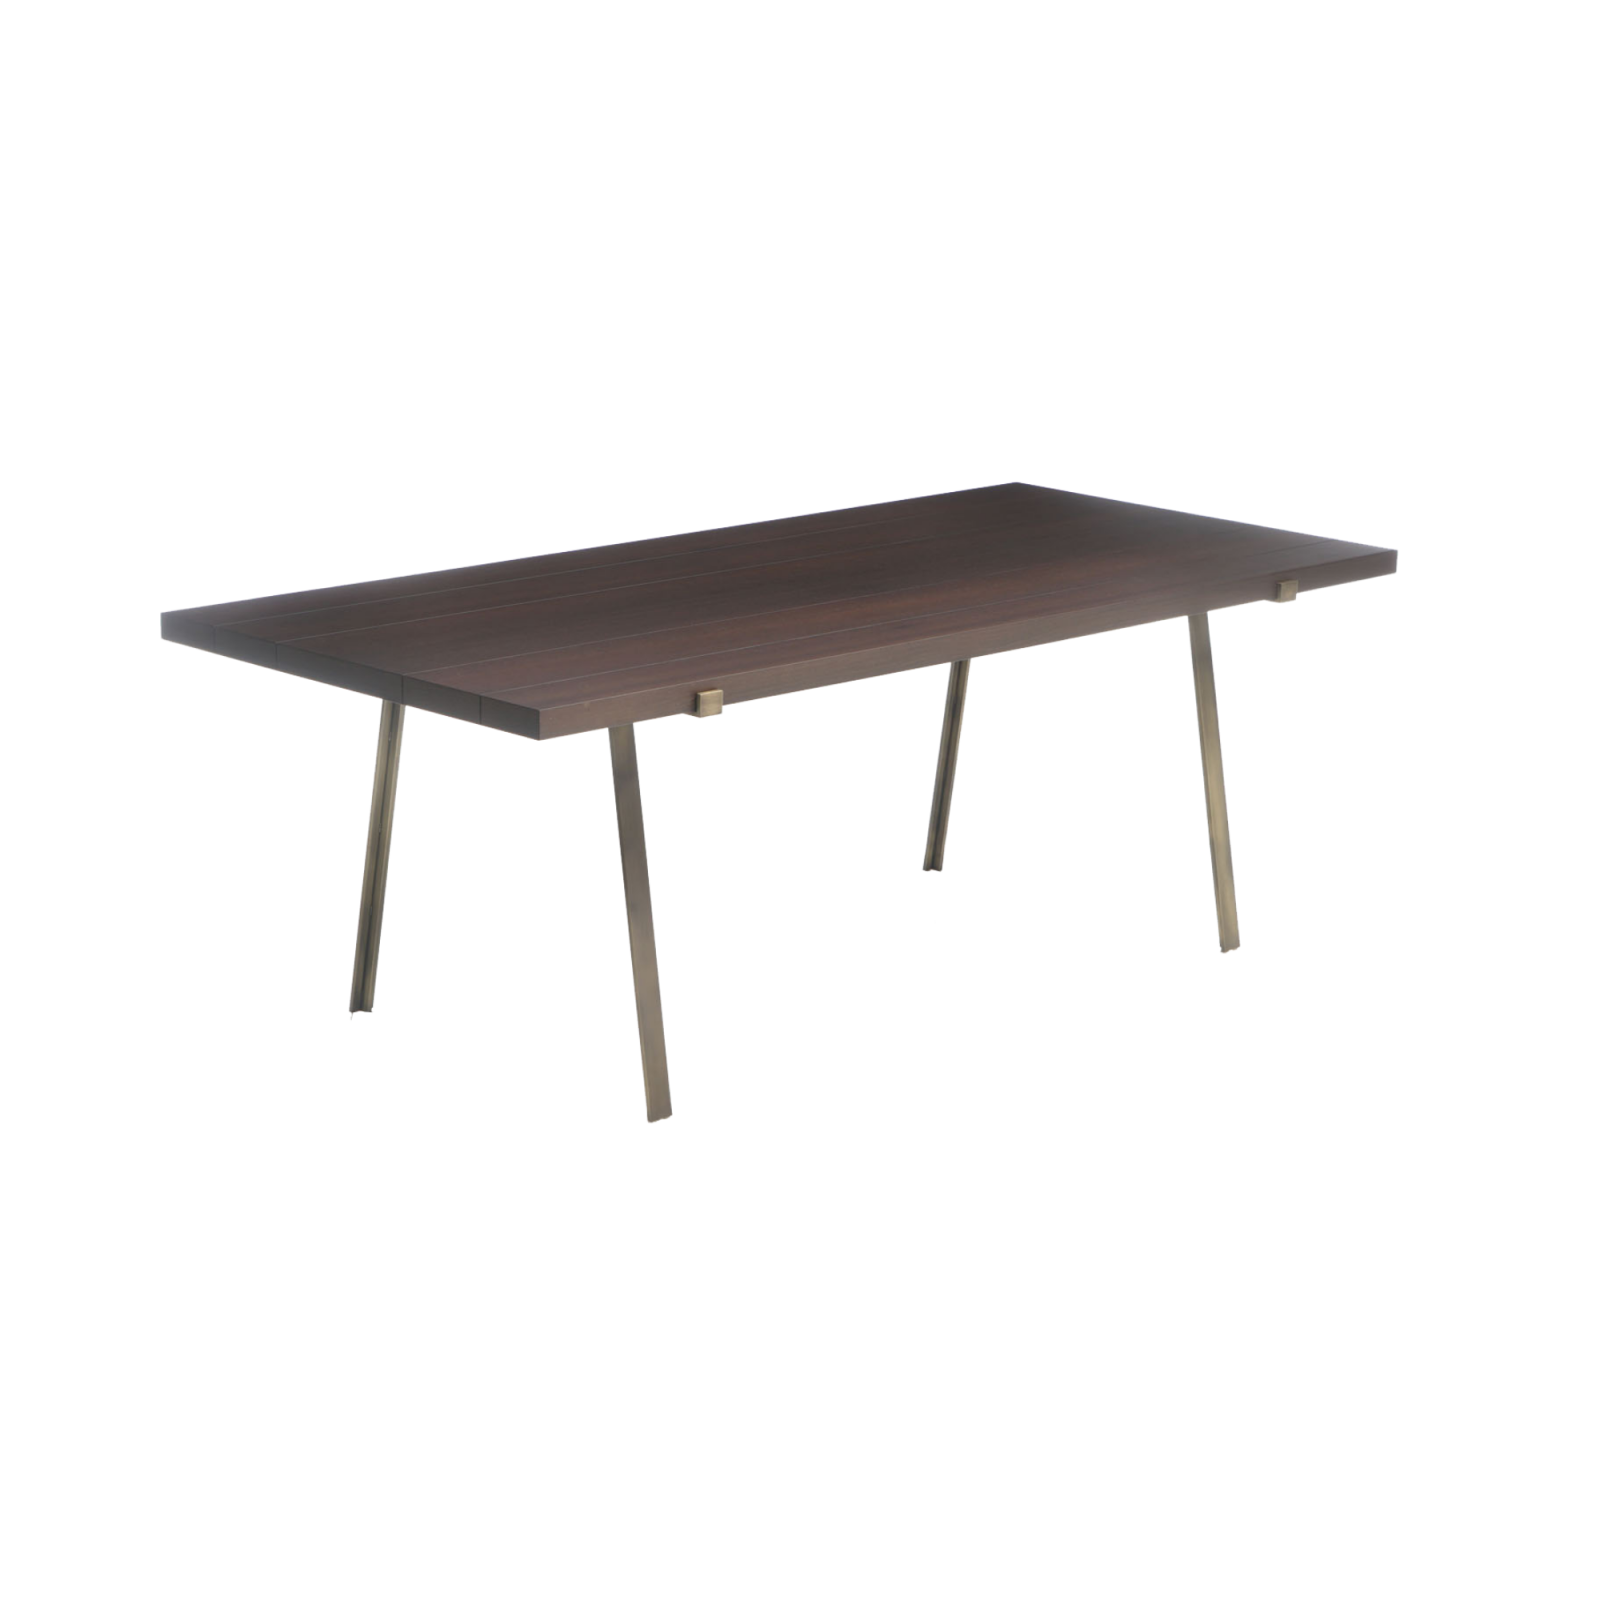 Eright Table, a rectangular and wooden table with a simple and natural design standing on a white background